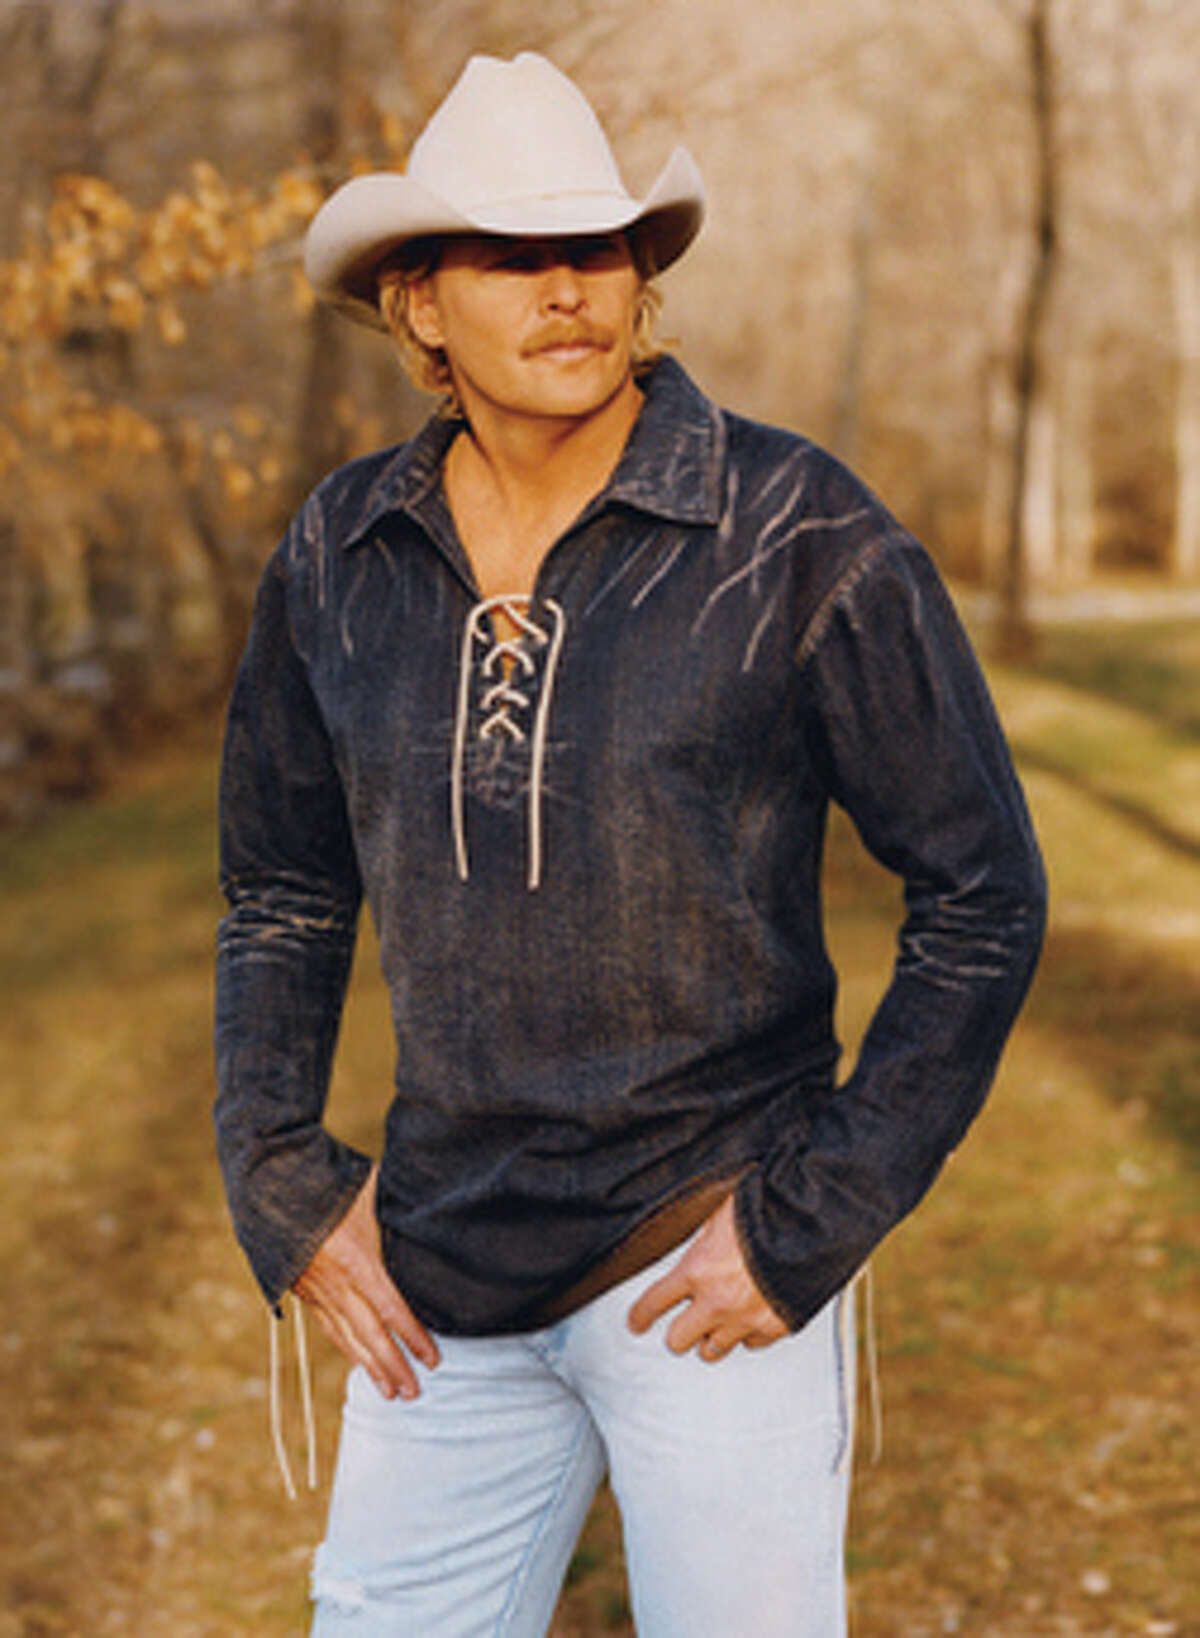 Alan Jackson closes out the Houston Livestock Show and Rodeo on March 18.